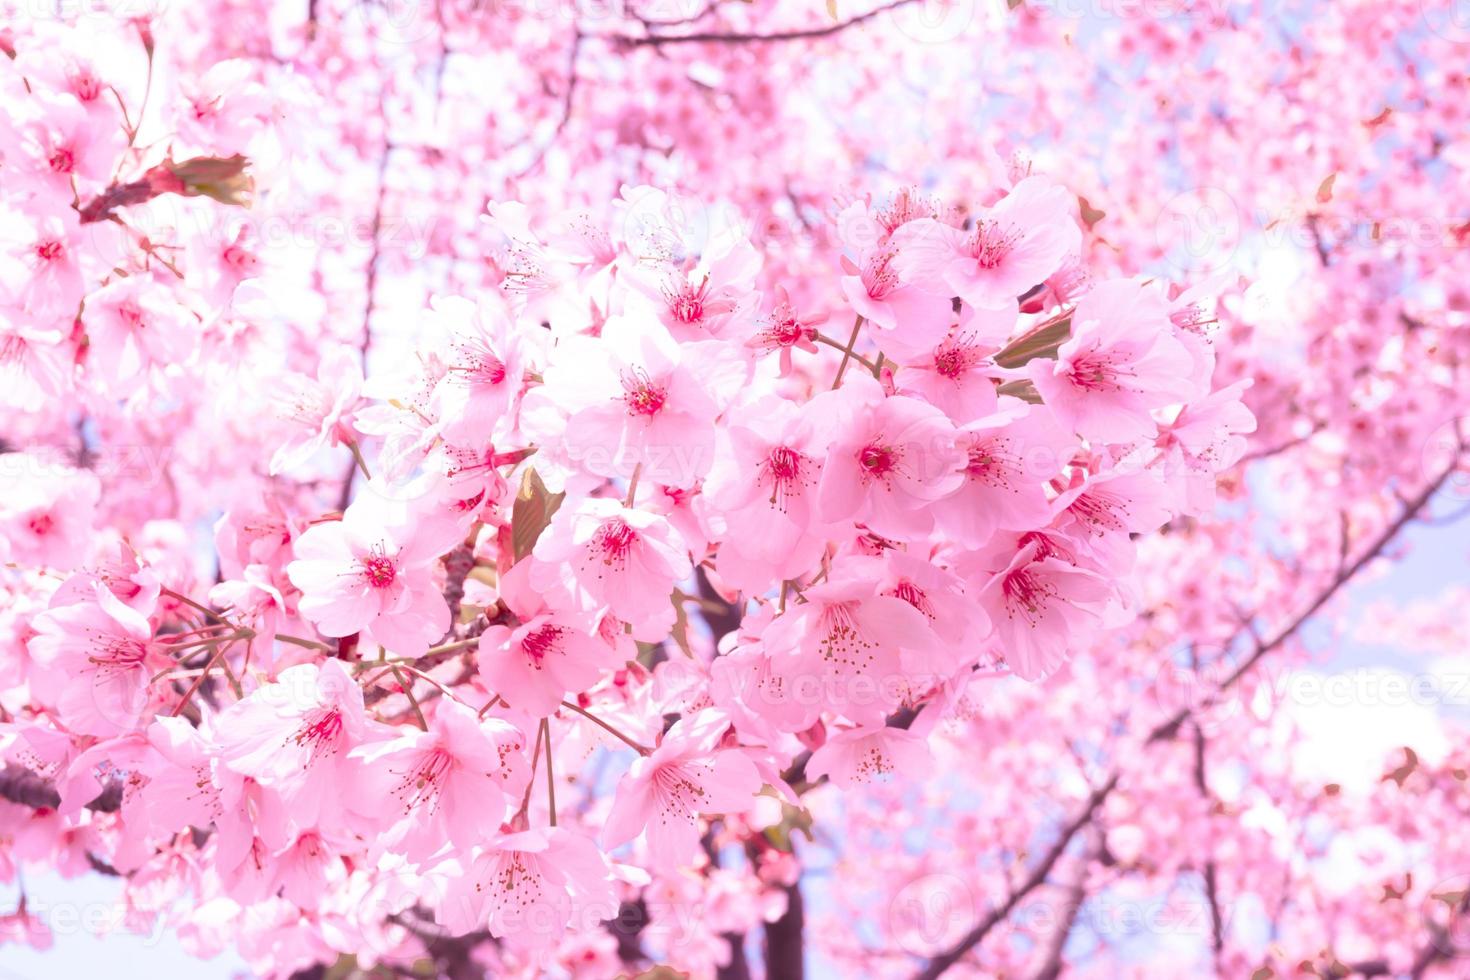 Soft focus,Cherry Blossom or Sakura flower on nature blur background in the morning a spring day photo